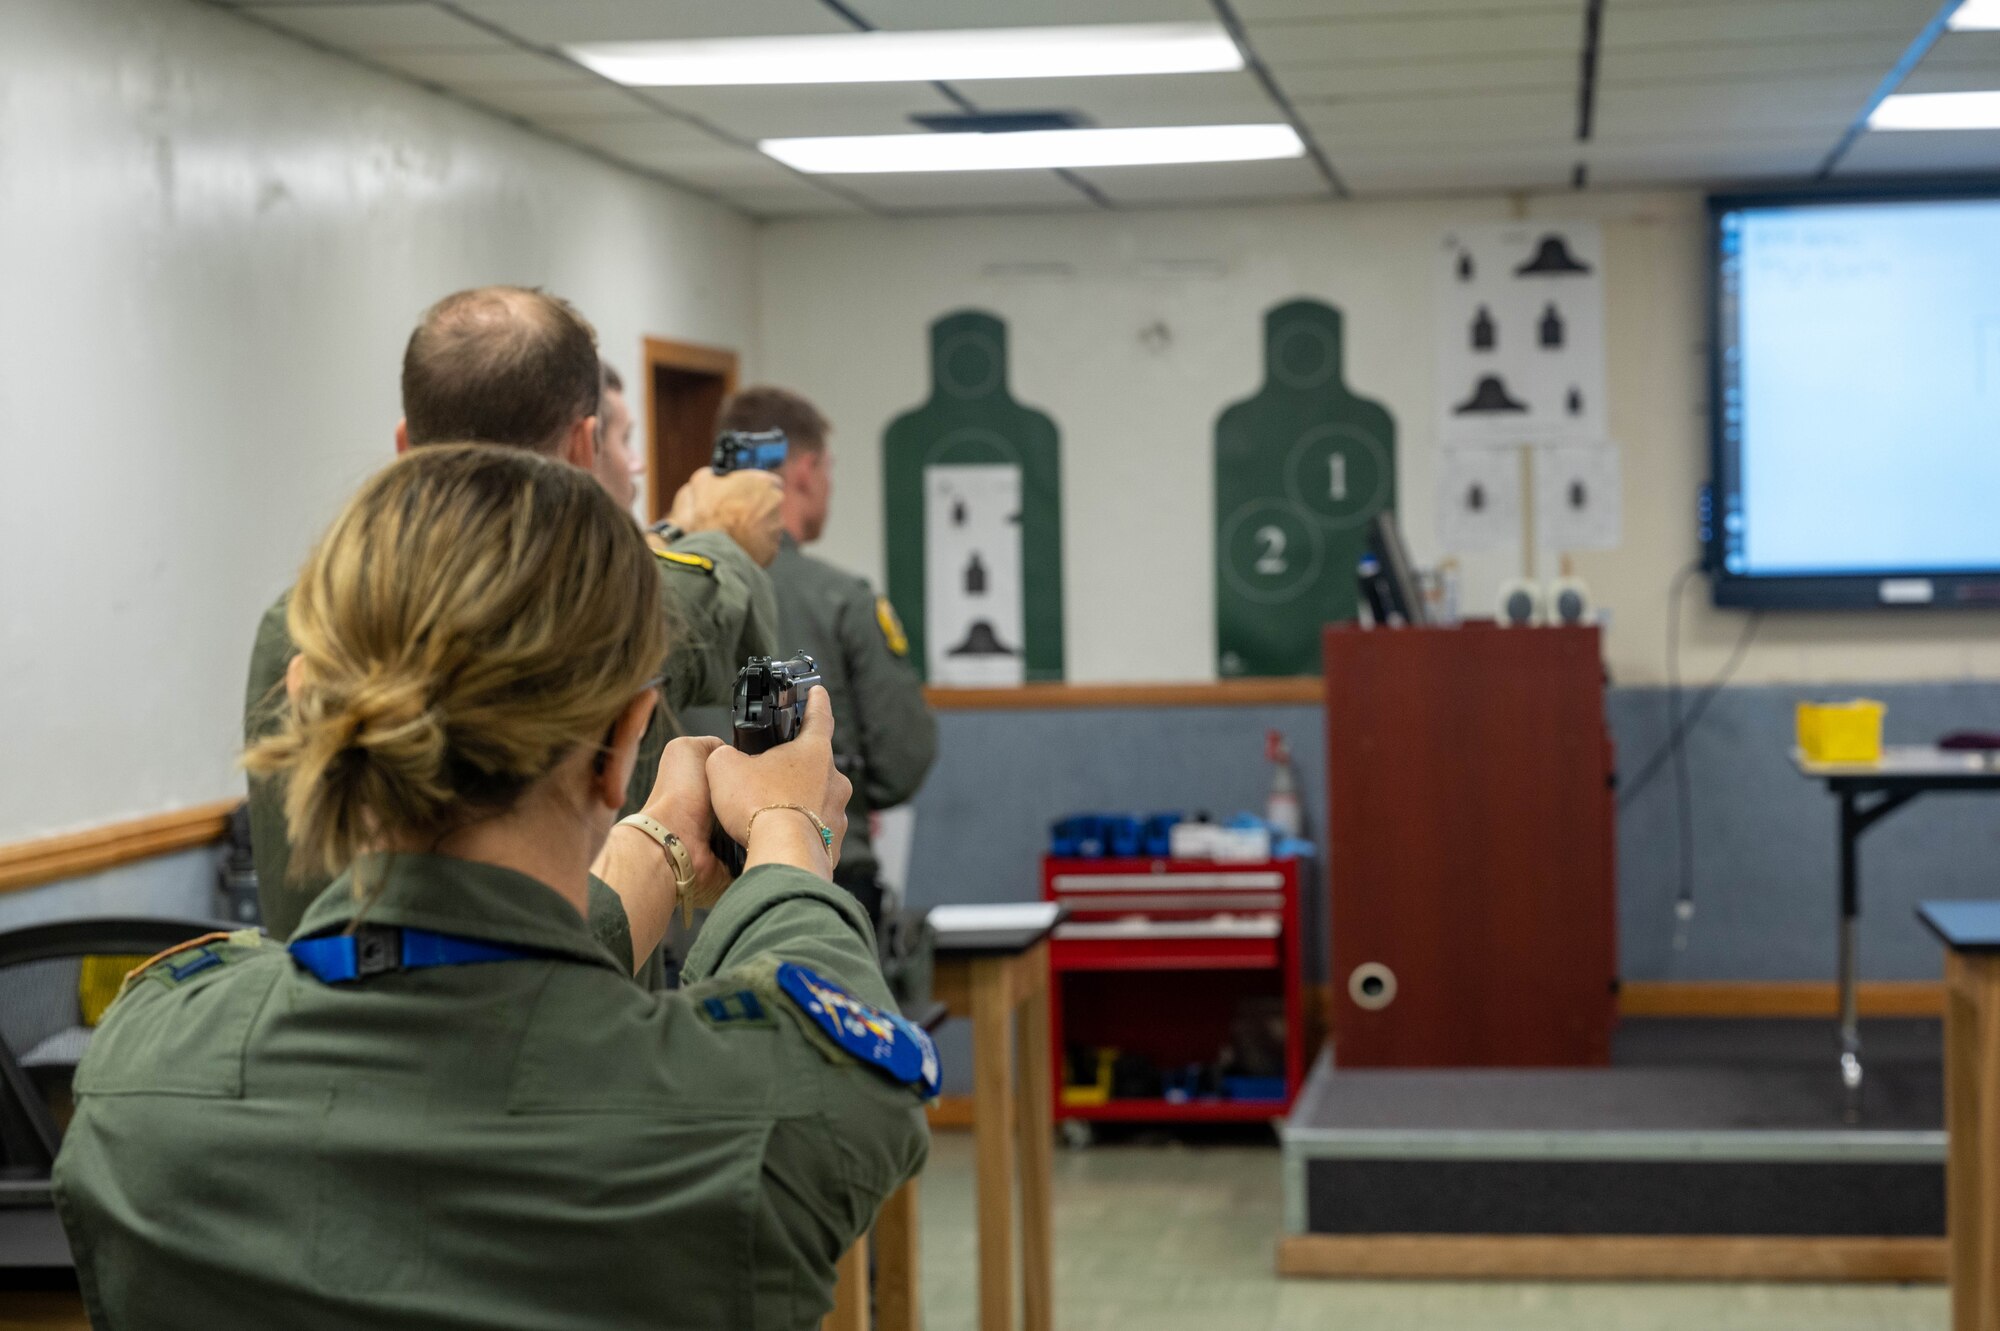 U.S. Air Force Capt. Miki Mullen, 309th Fighter Squadron student pilot, practices proper aiming with an M9 service pistol during a qualification course, Oct. 27, 2022, at Luke Air Force Base, Arizona.